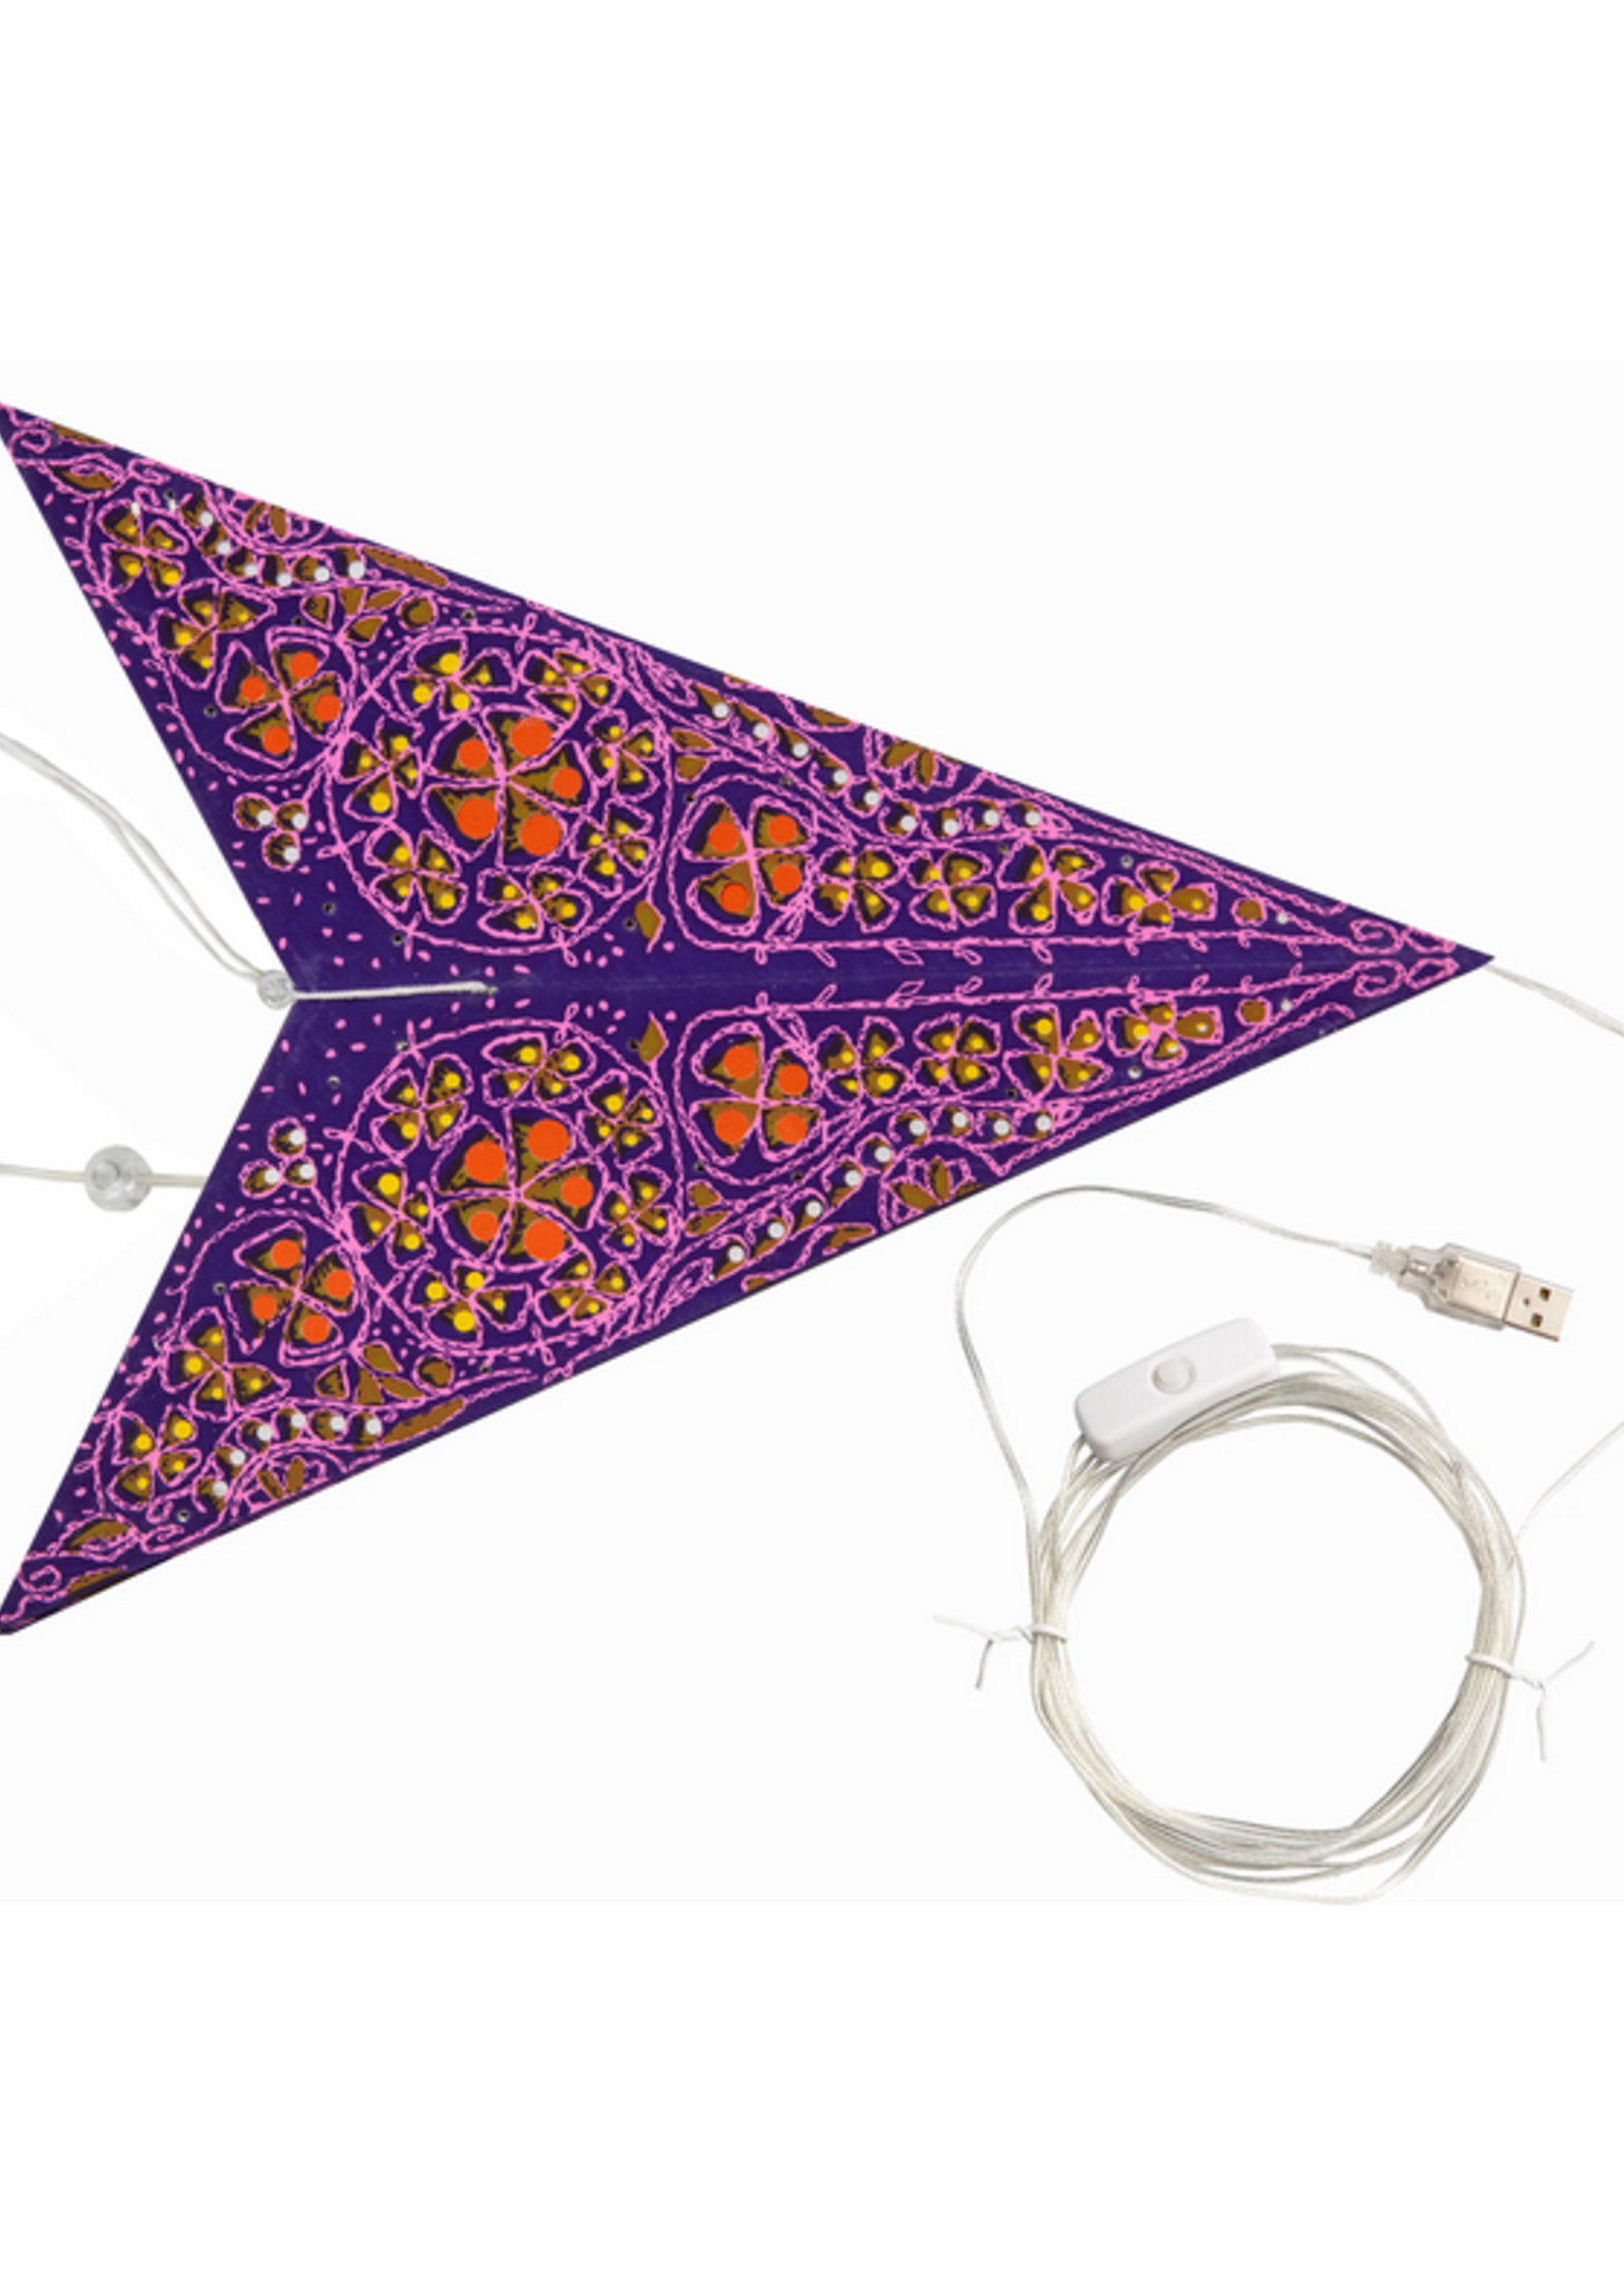 CATHEDRAL 5-Pointed Purple & Violet Star Lantern Light